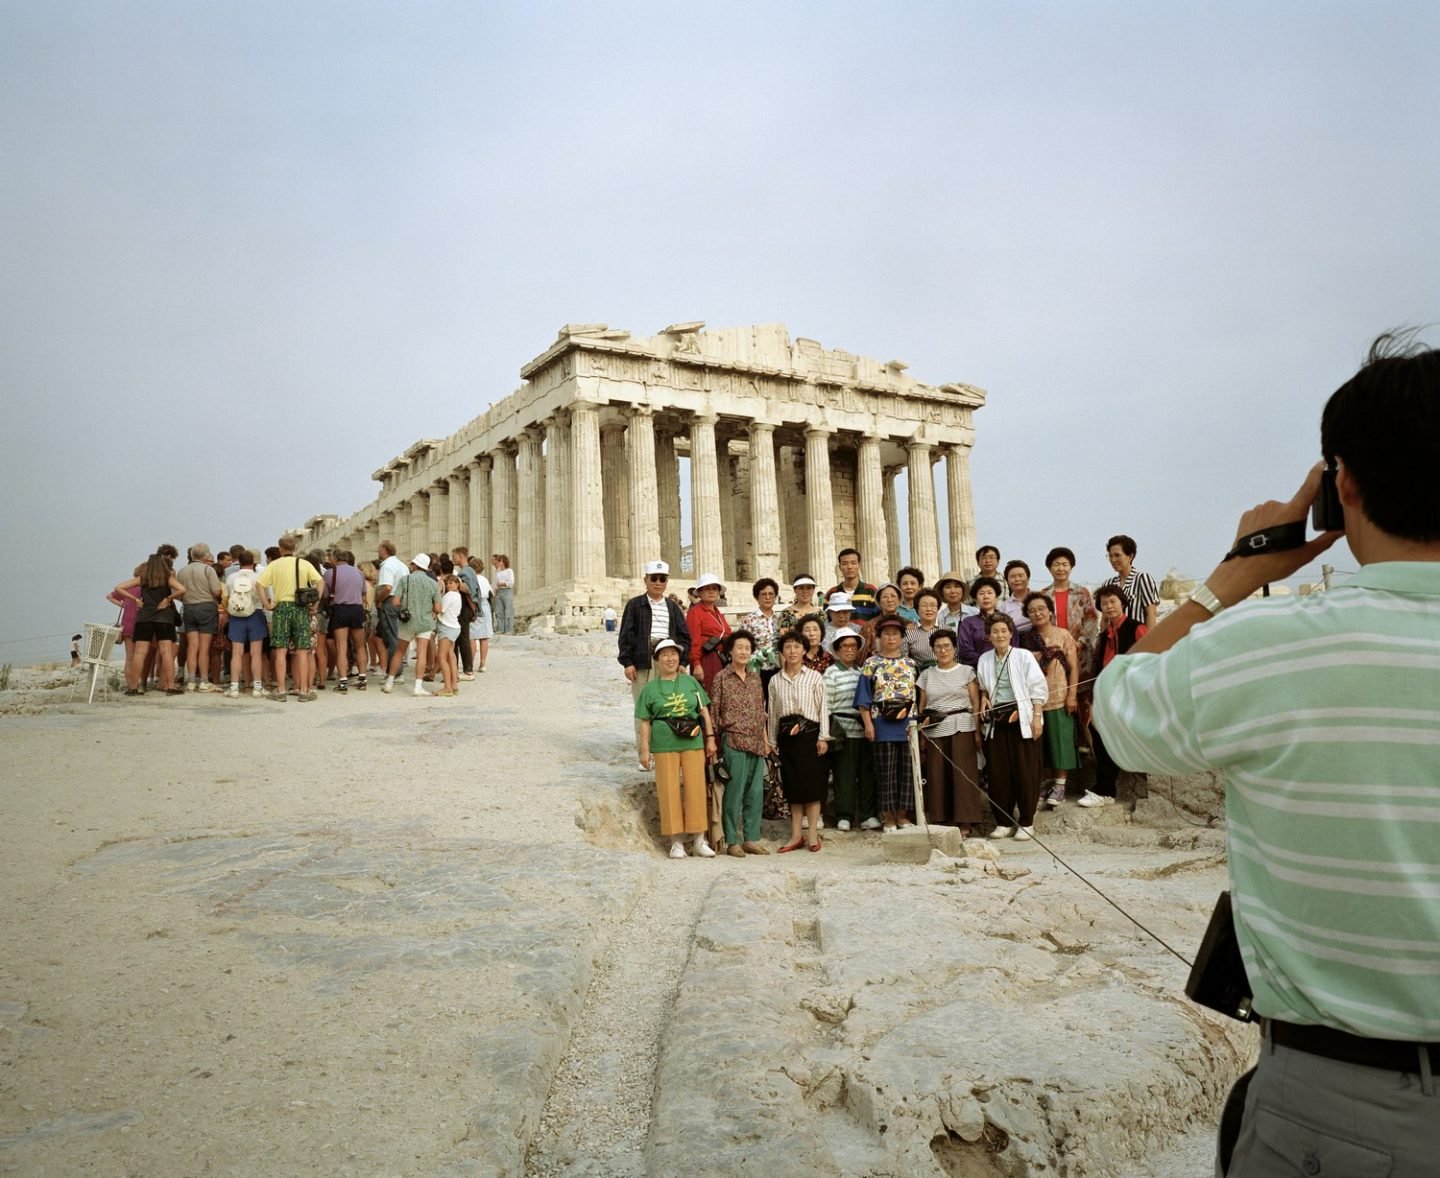 GREECE. Athens. Acropolis. From 'Small World'. 1991.